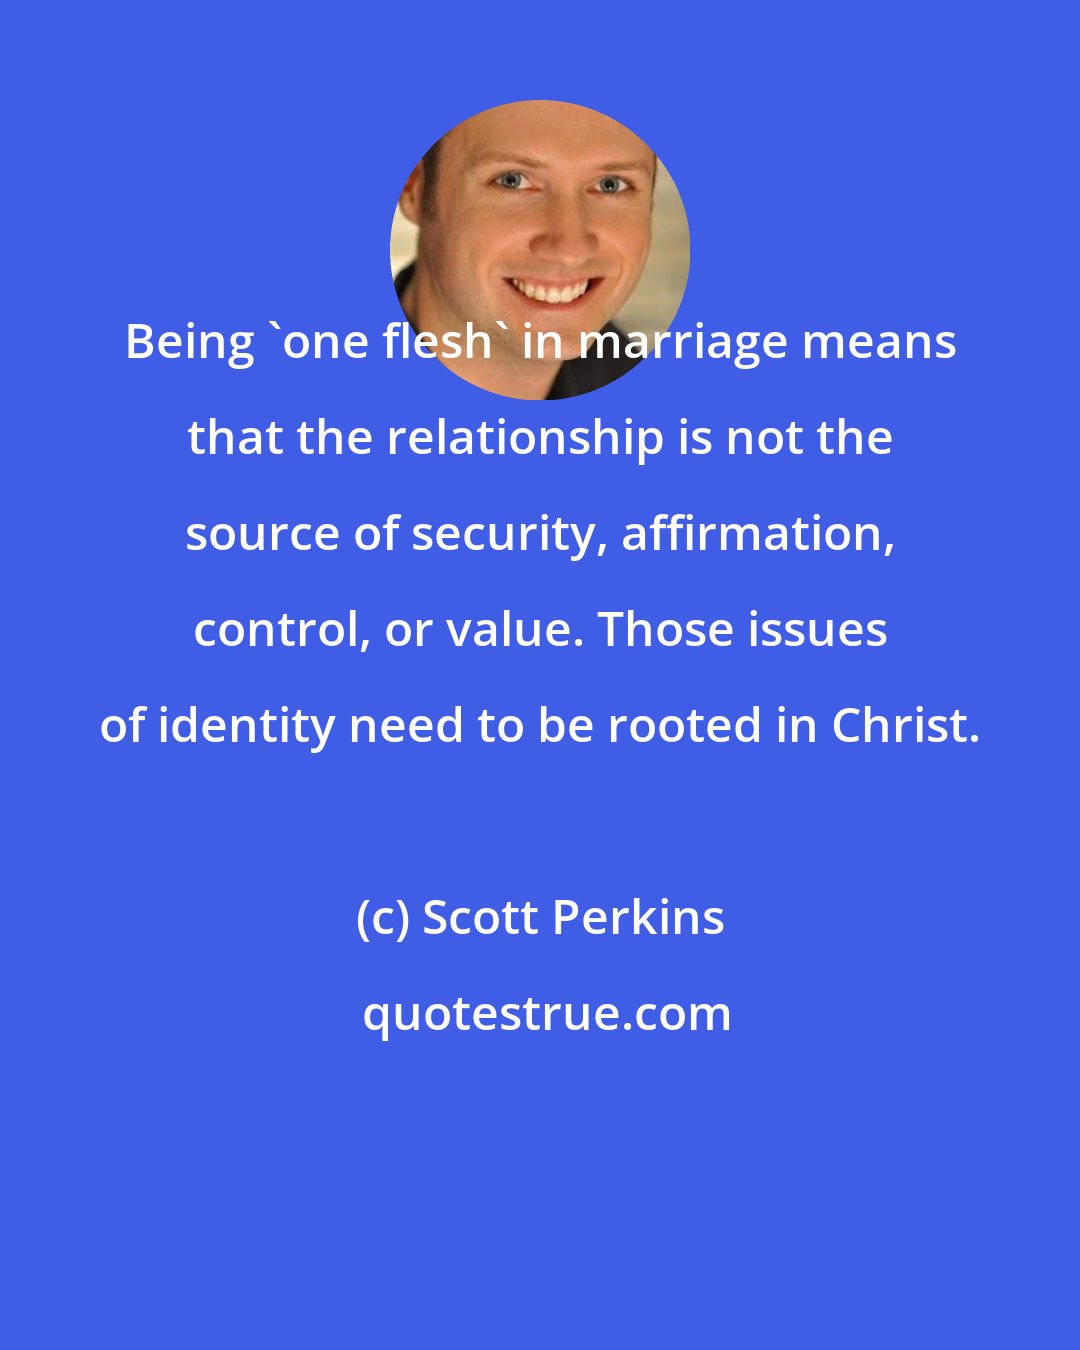 Scott Perkins: Being 'one flesh' in marriage means that the relationship is not the source of security, affirmation, control, or value. Those issues of identity need to be rooted in Christ.